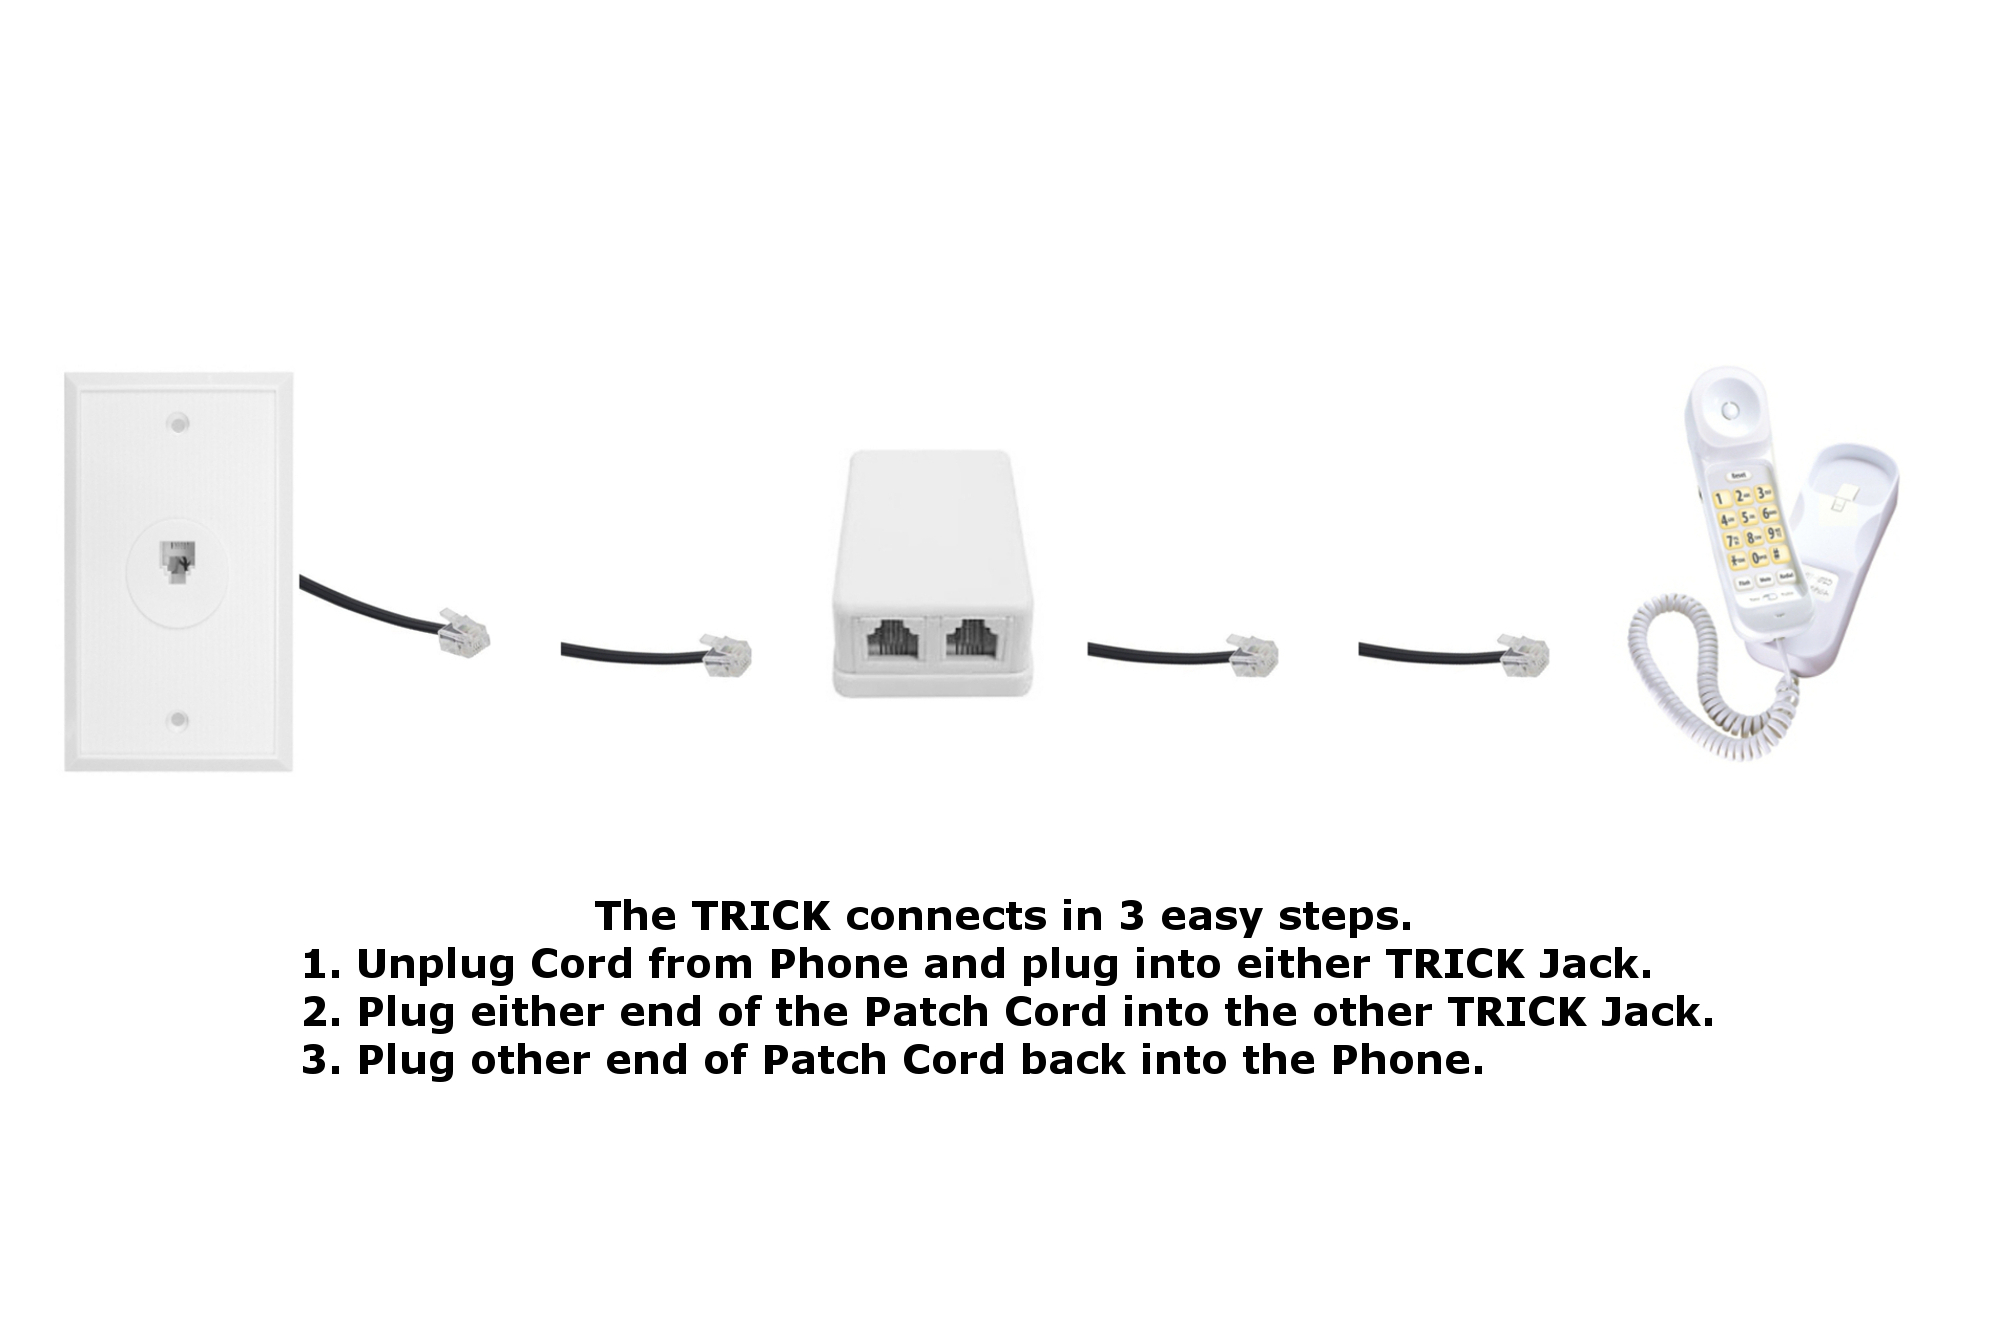 TRICK telephone on off cord switch,
disconnect kill landline phone cord ringer ringing